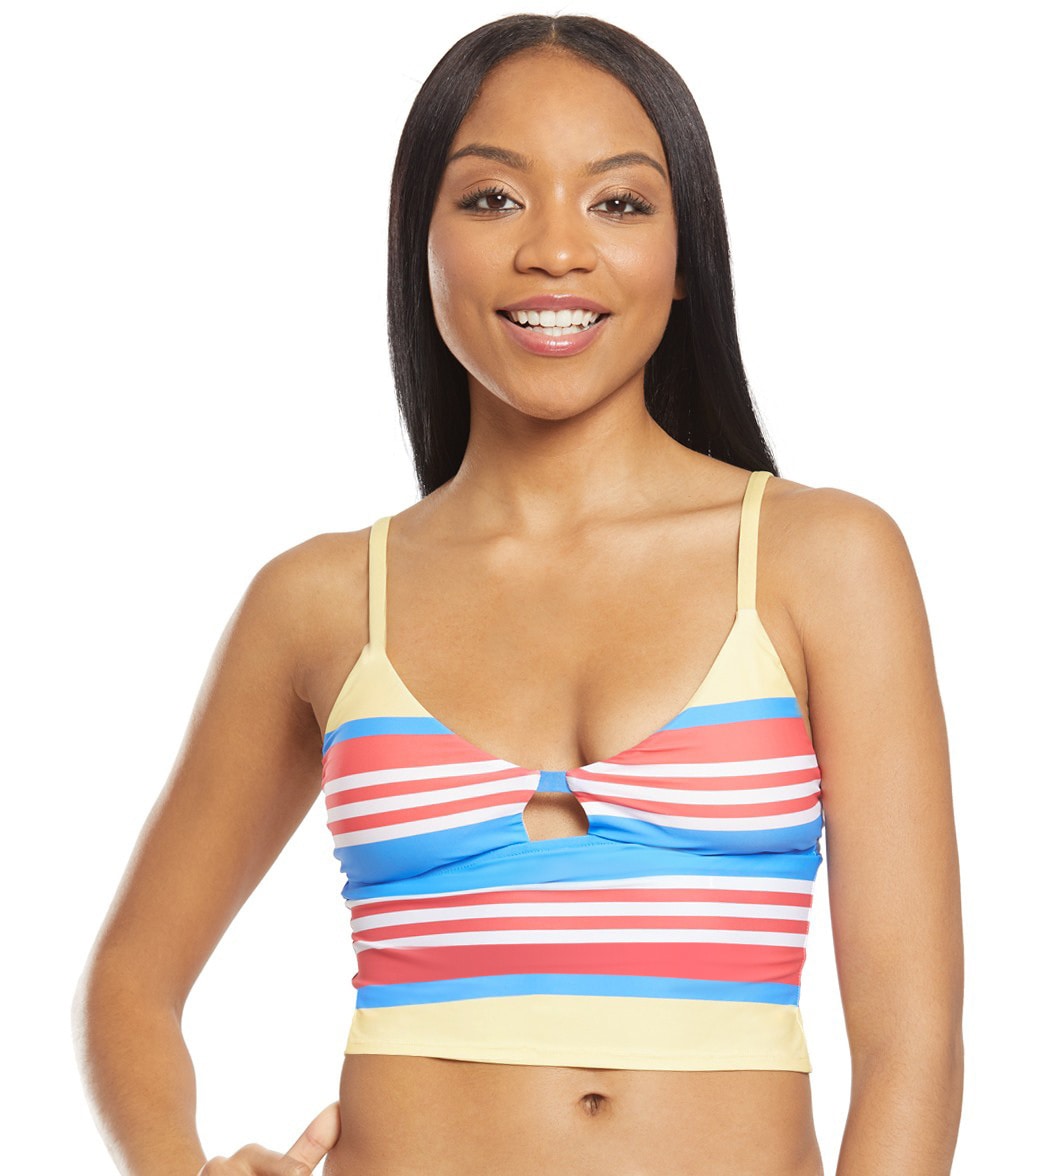 Ralph Lauren Polo Engineered Stripes Tankini Top - Red/Yellow/Blue Large - Swimoutlet.com